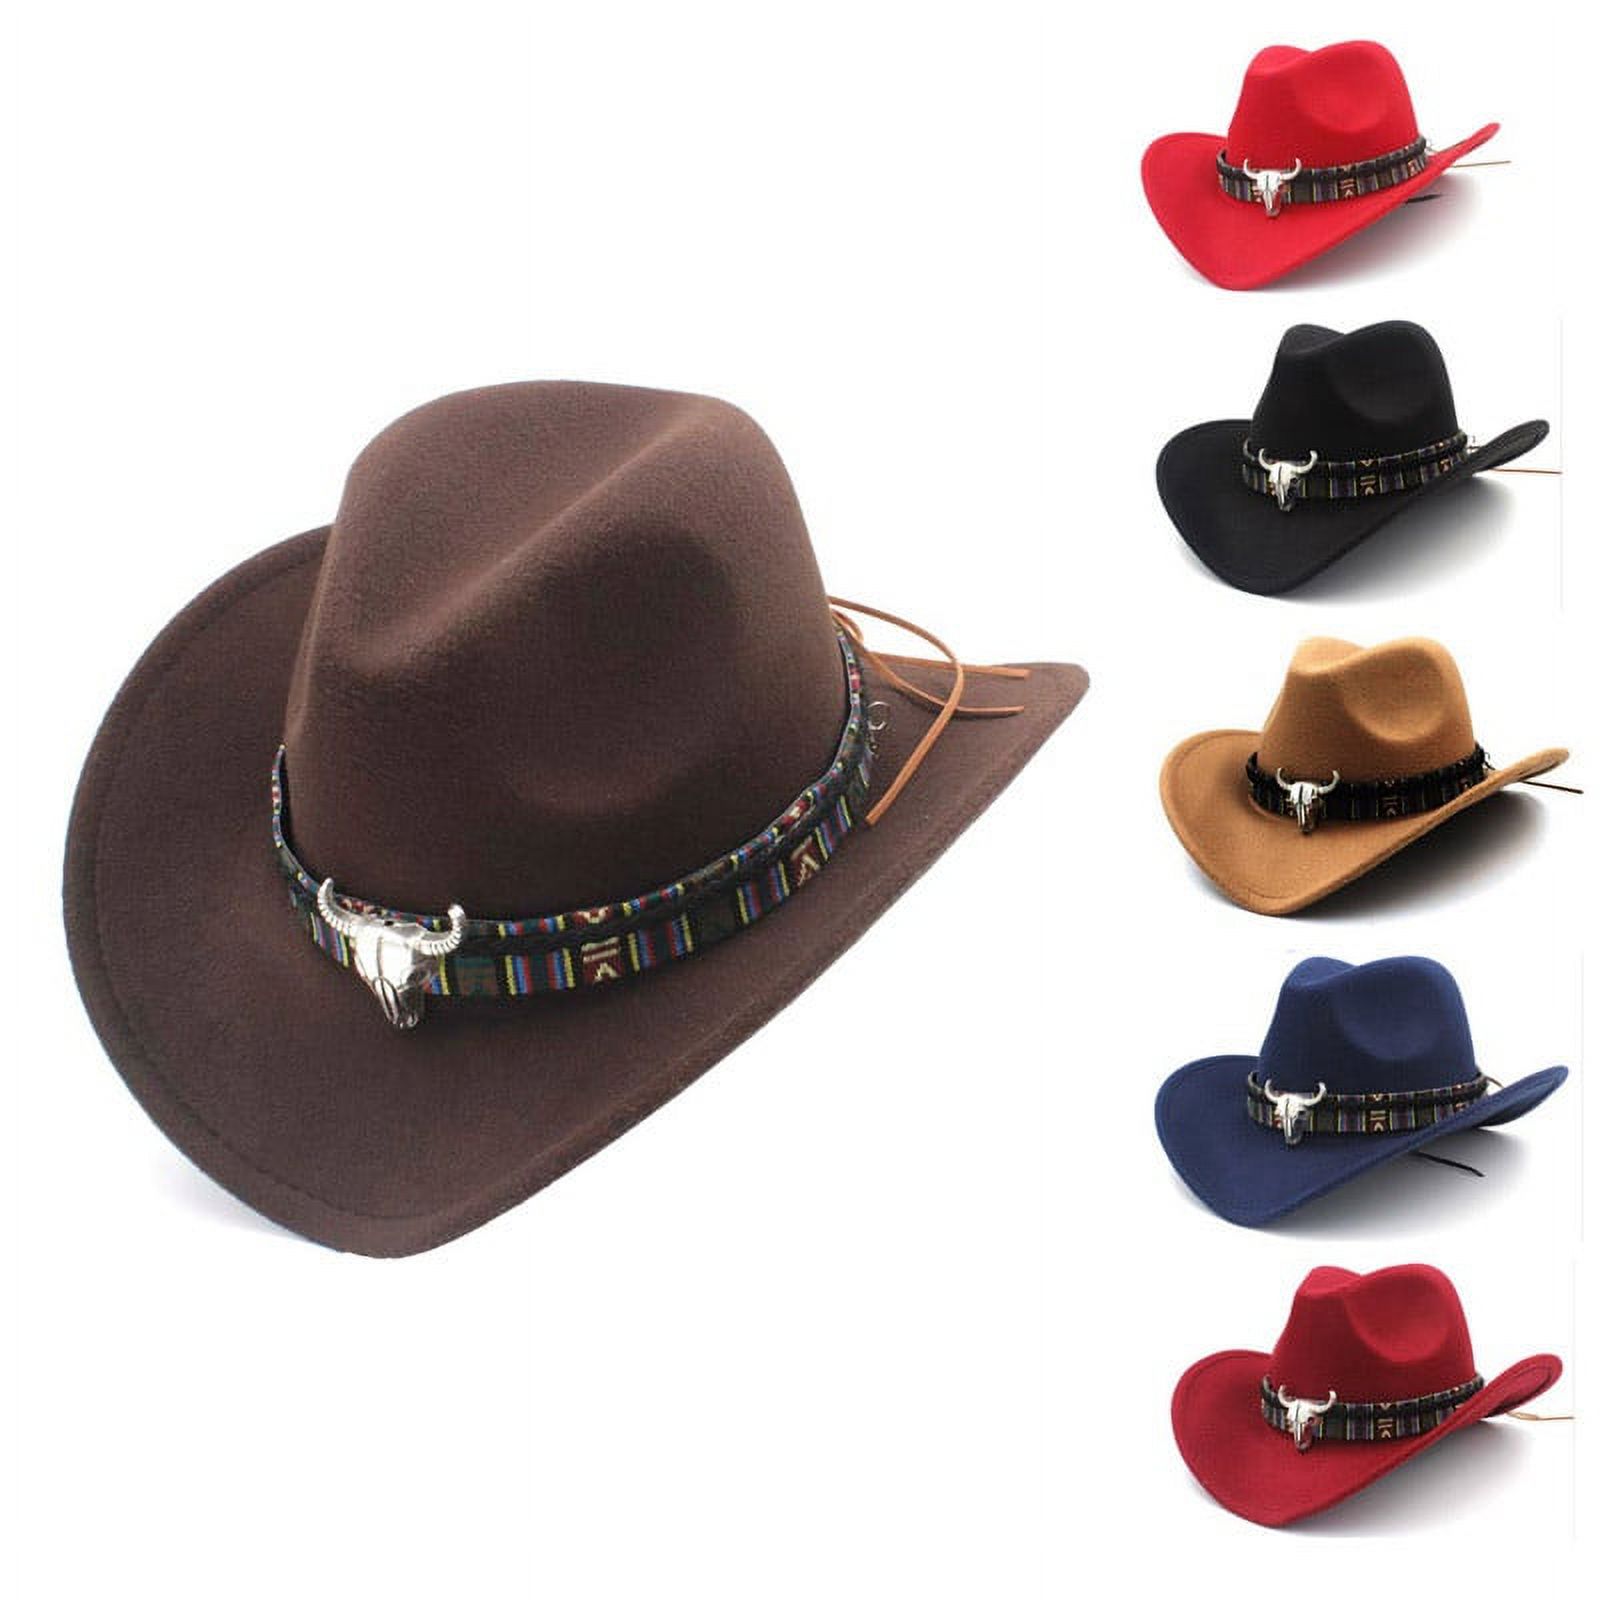 Cowboy Hat for Men Faux Felt Western Outdoor Wide Brim Hat with Strap Jazz Hat Wide Brim Panama Cowboy Hats Floppy Sun Hat for Beach Church Wine Red - image 2 of 3